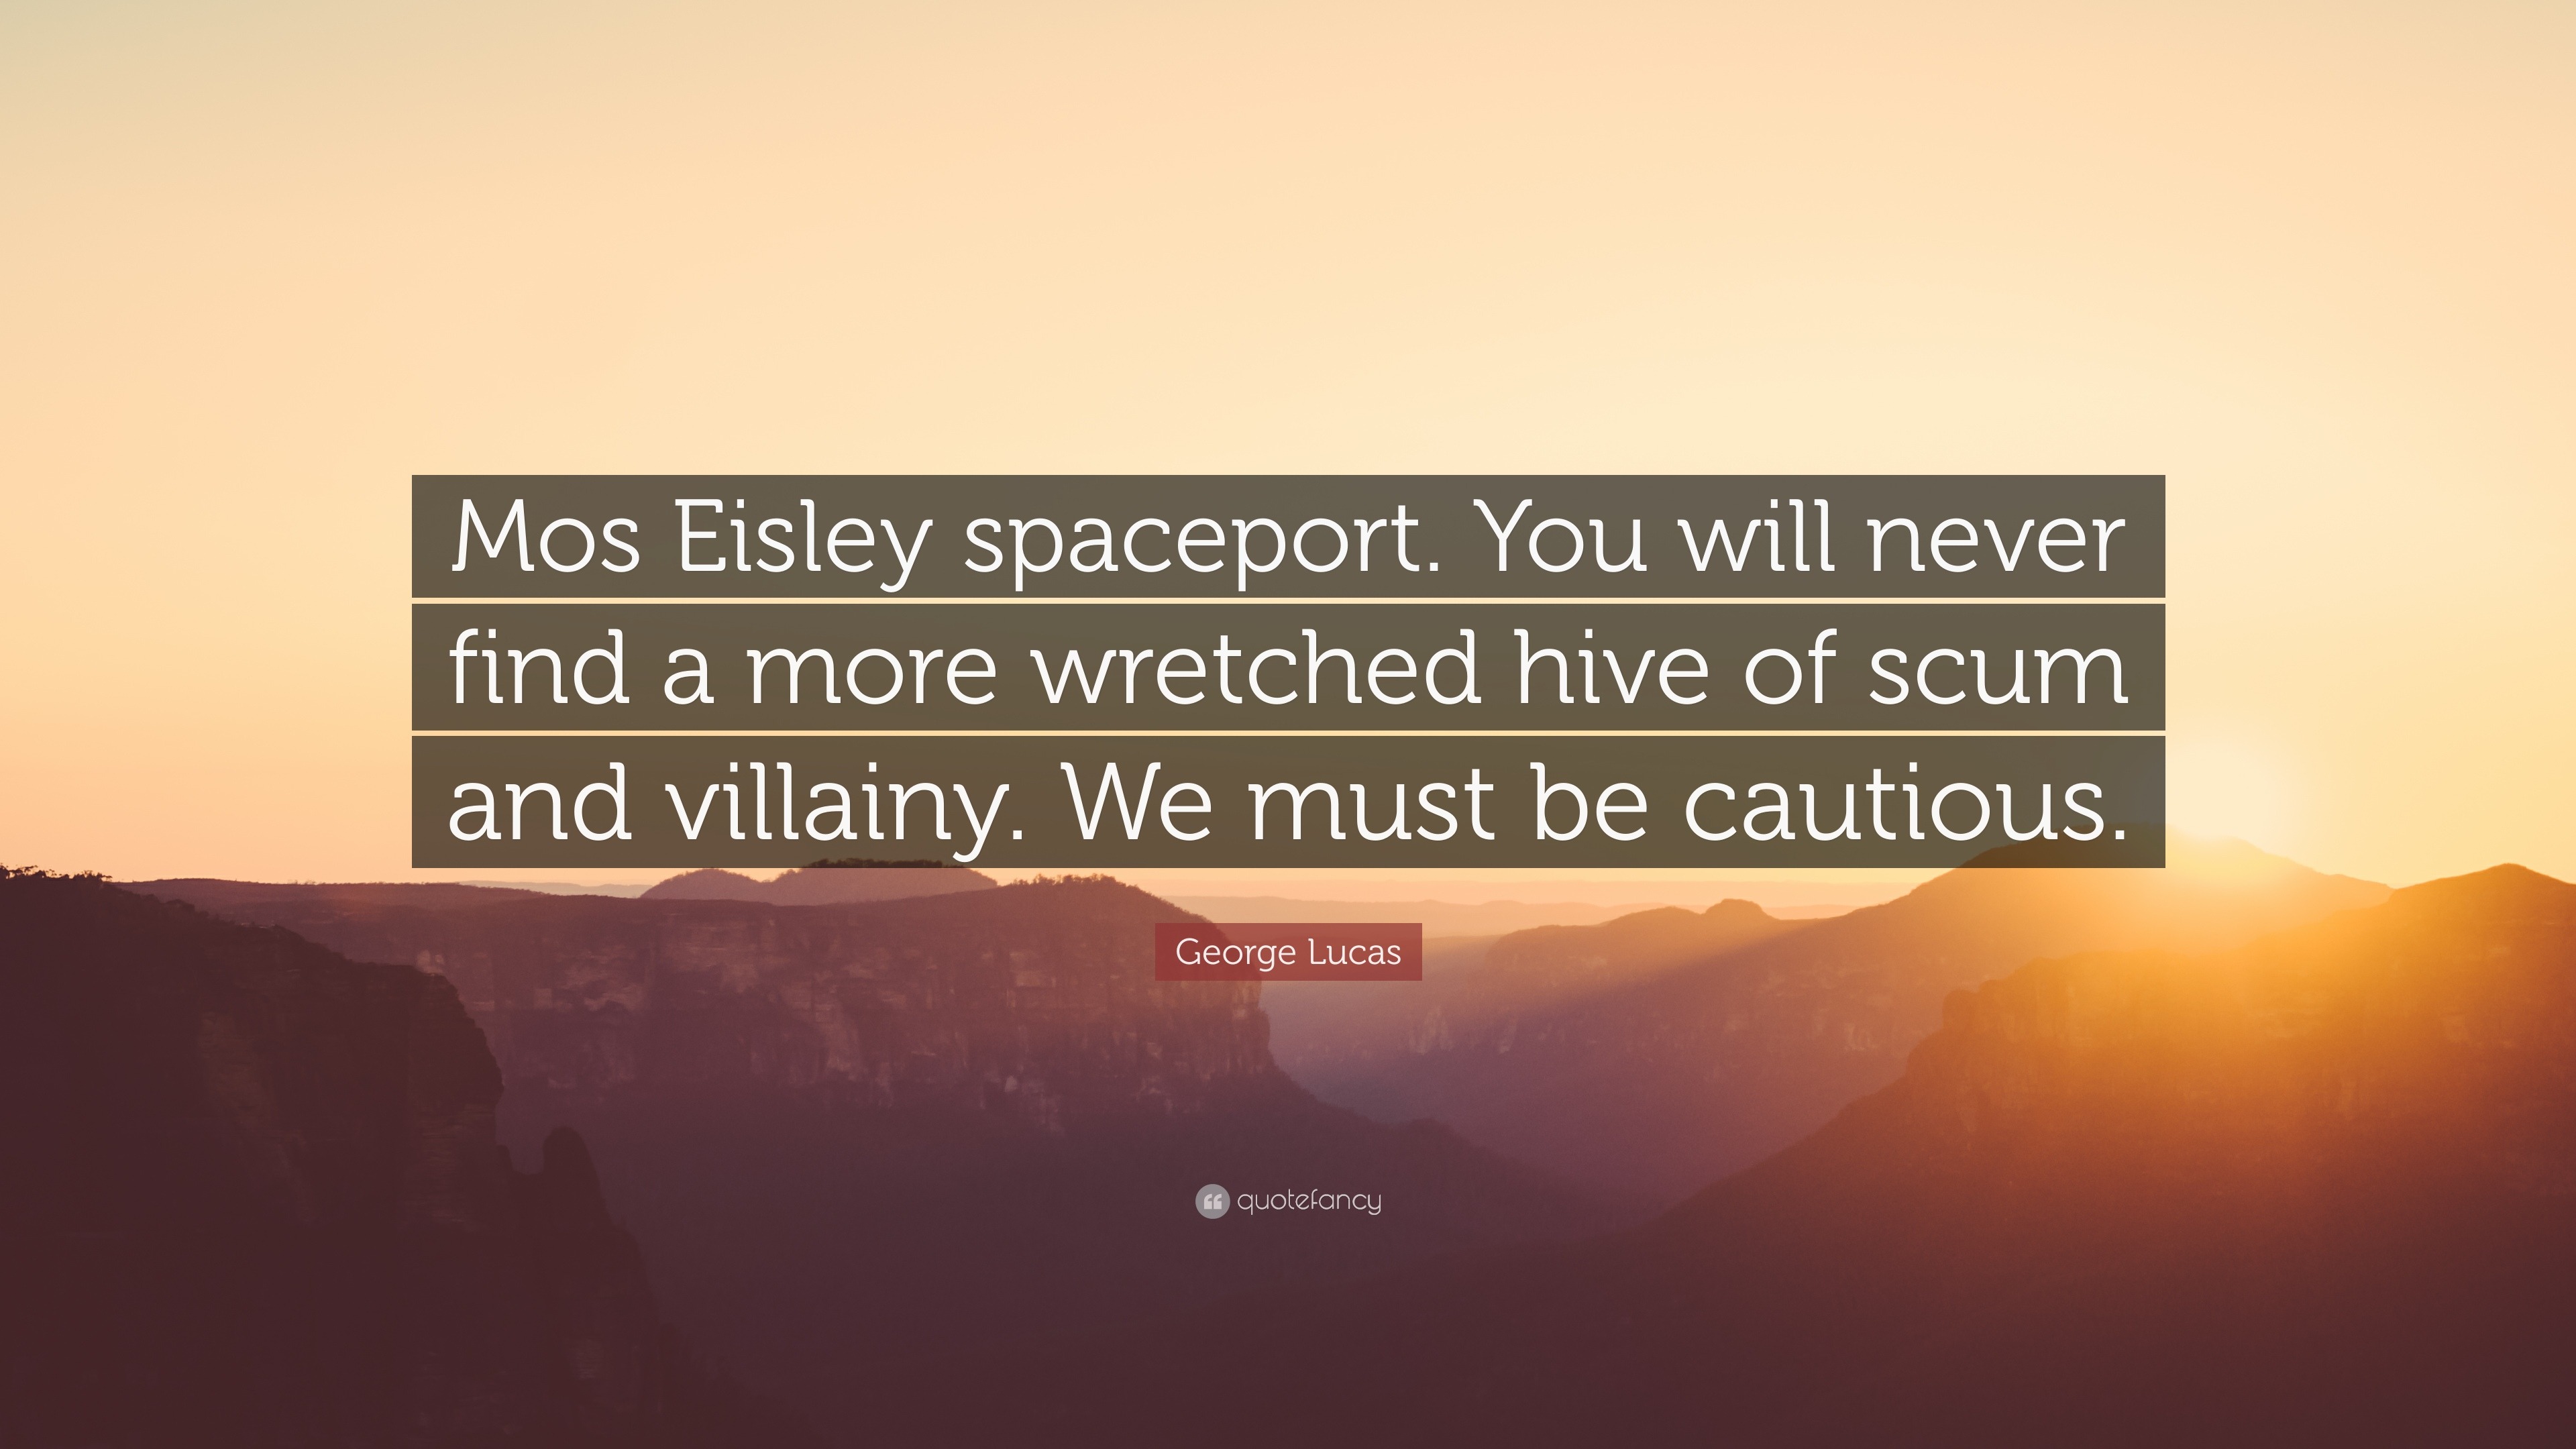 George Lucas Quote Mos Eisley spaceport You will never find a more 